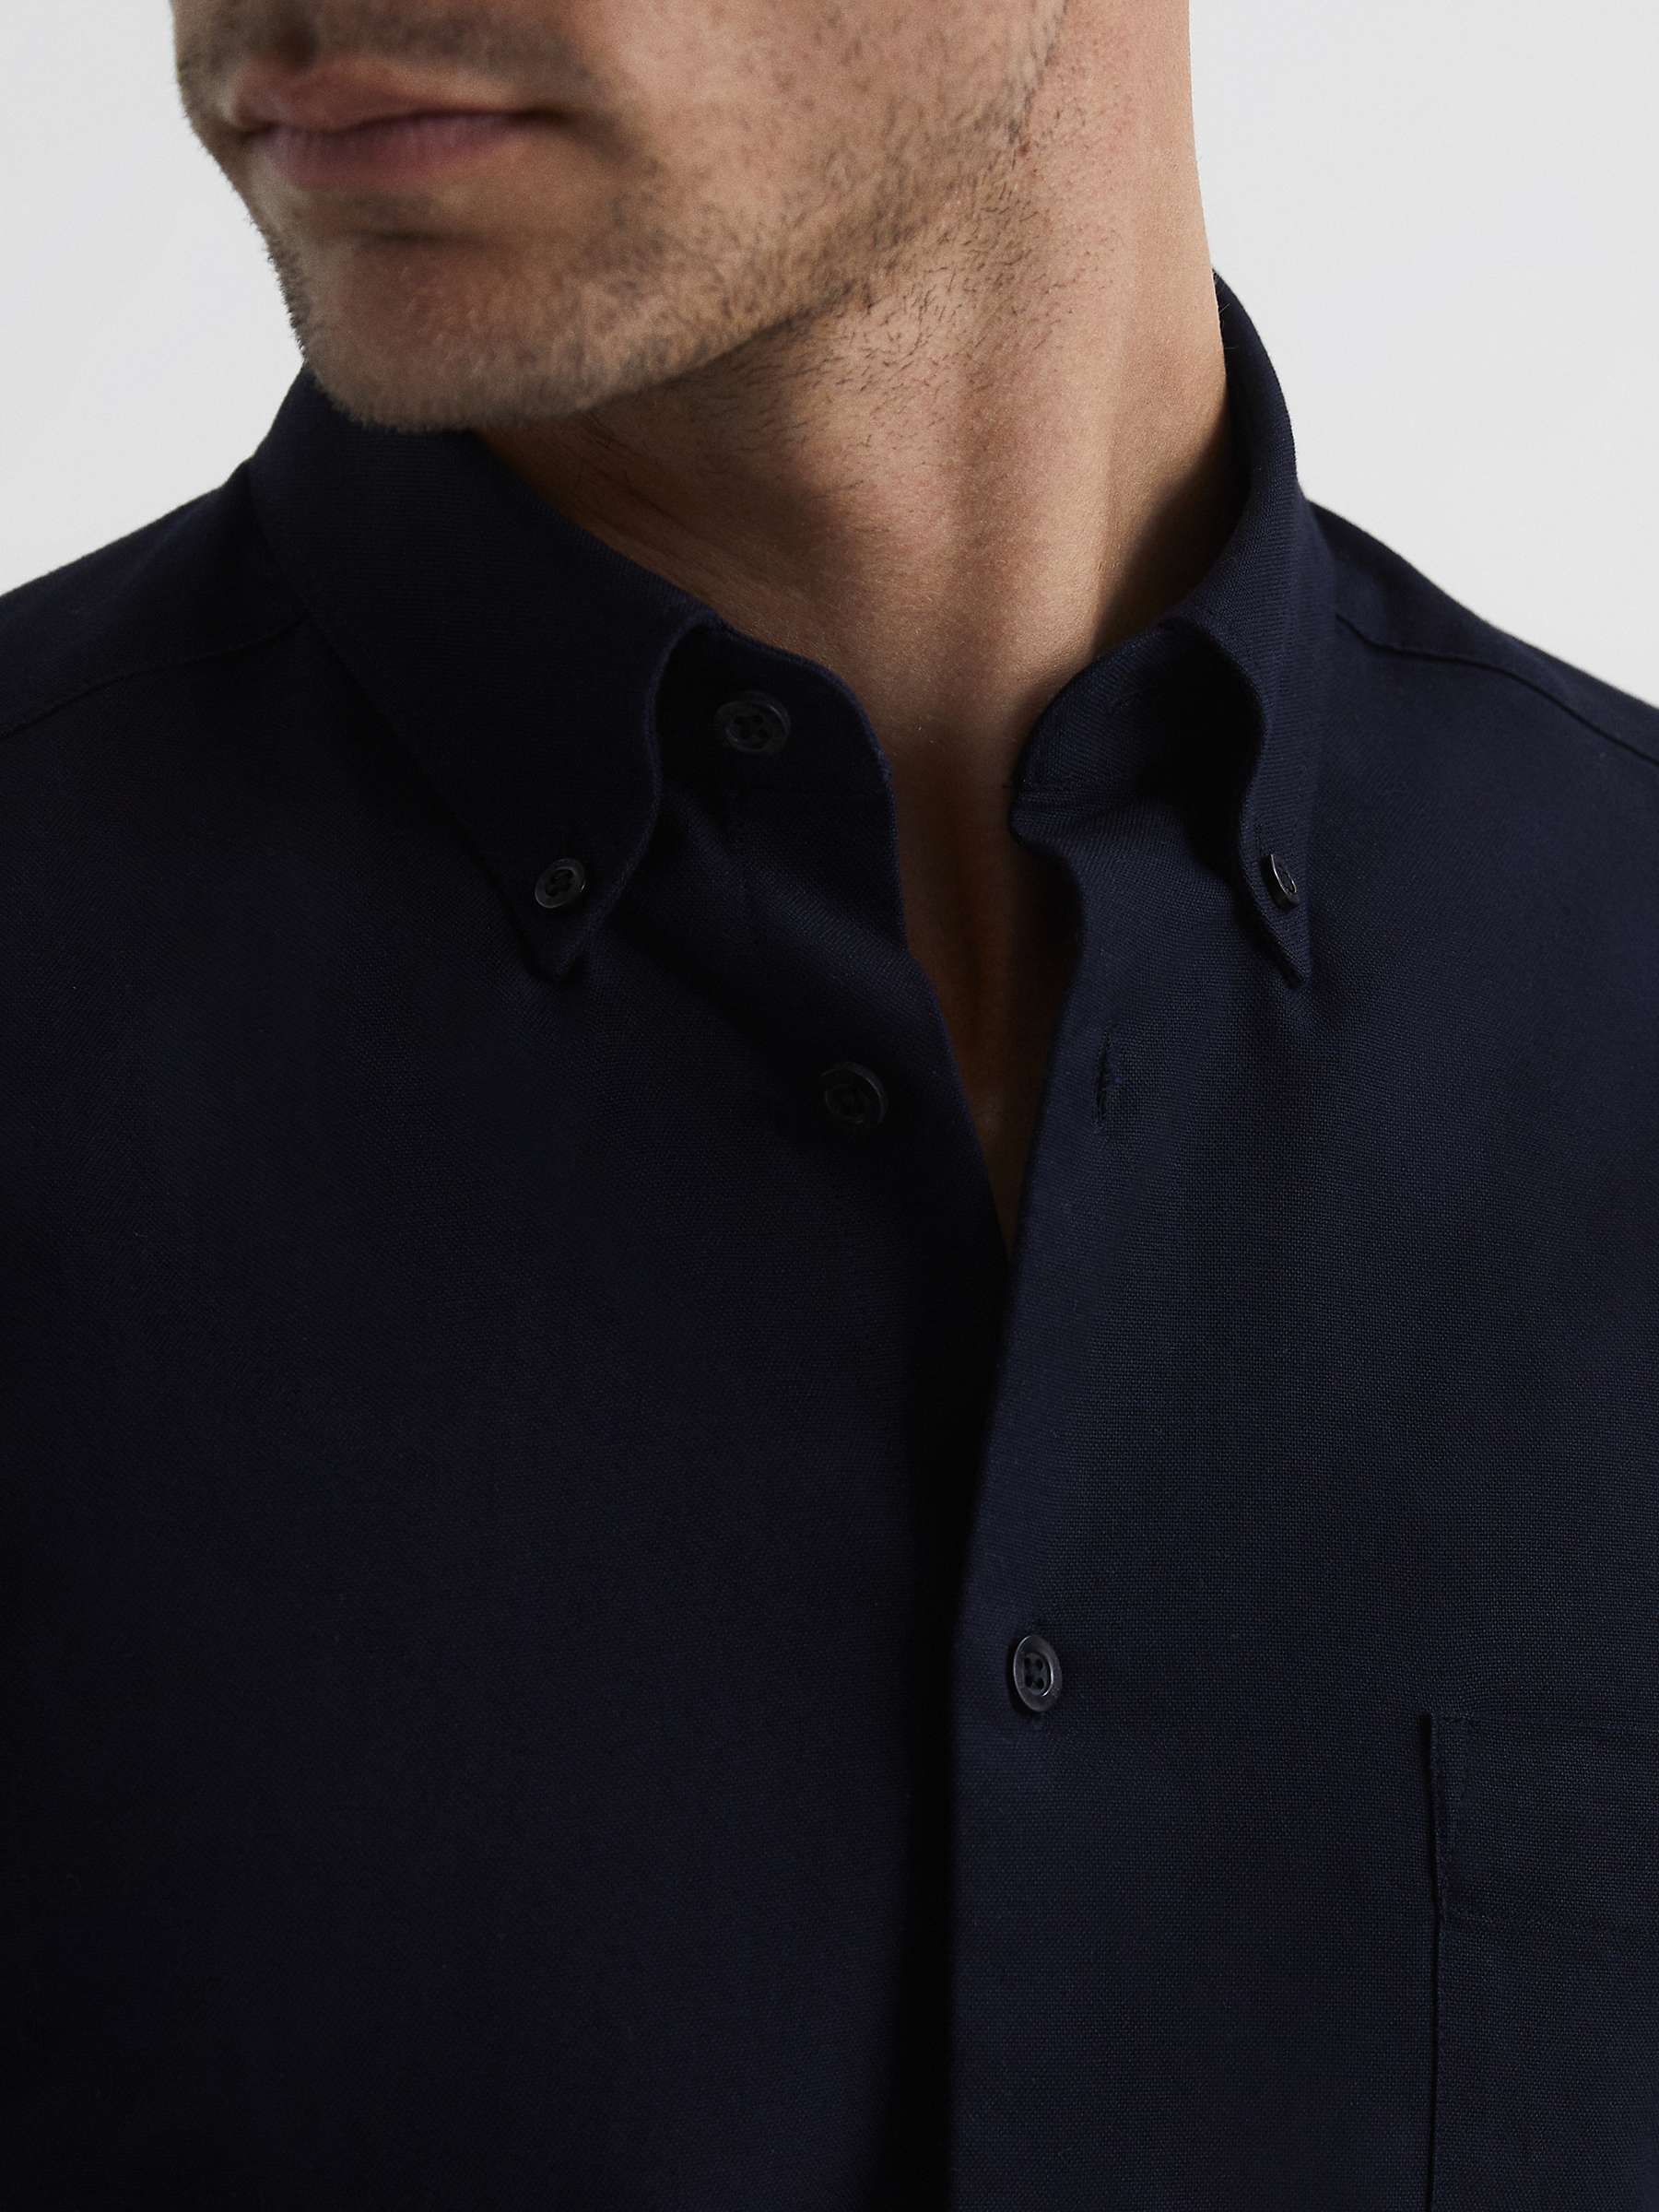 Buy Reiss Greenwich Casual Oxford Shirt, Navy Online at johnlewis.com